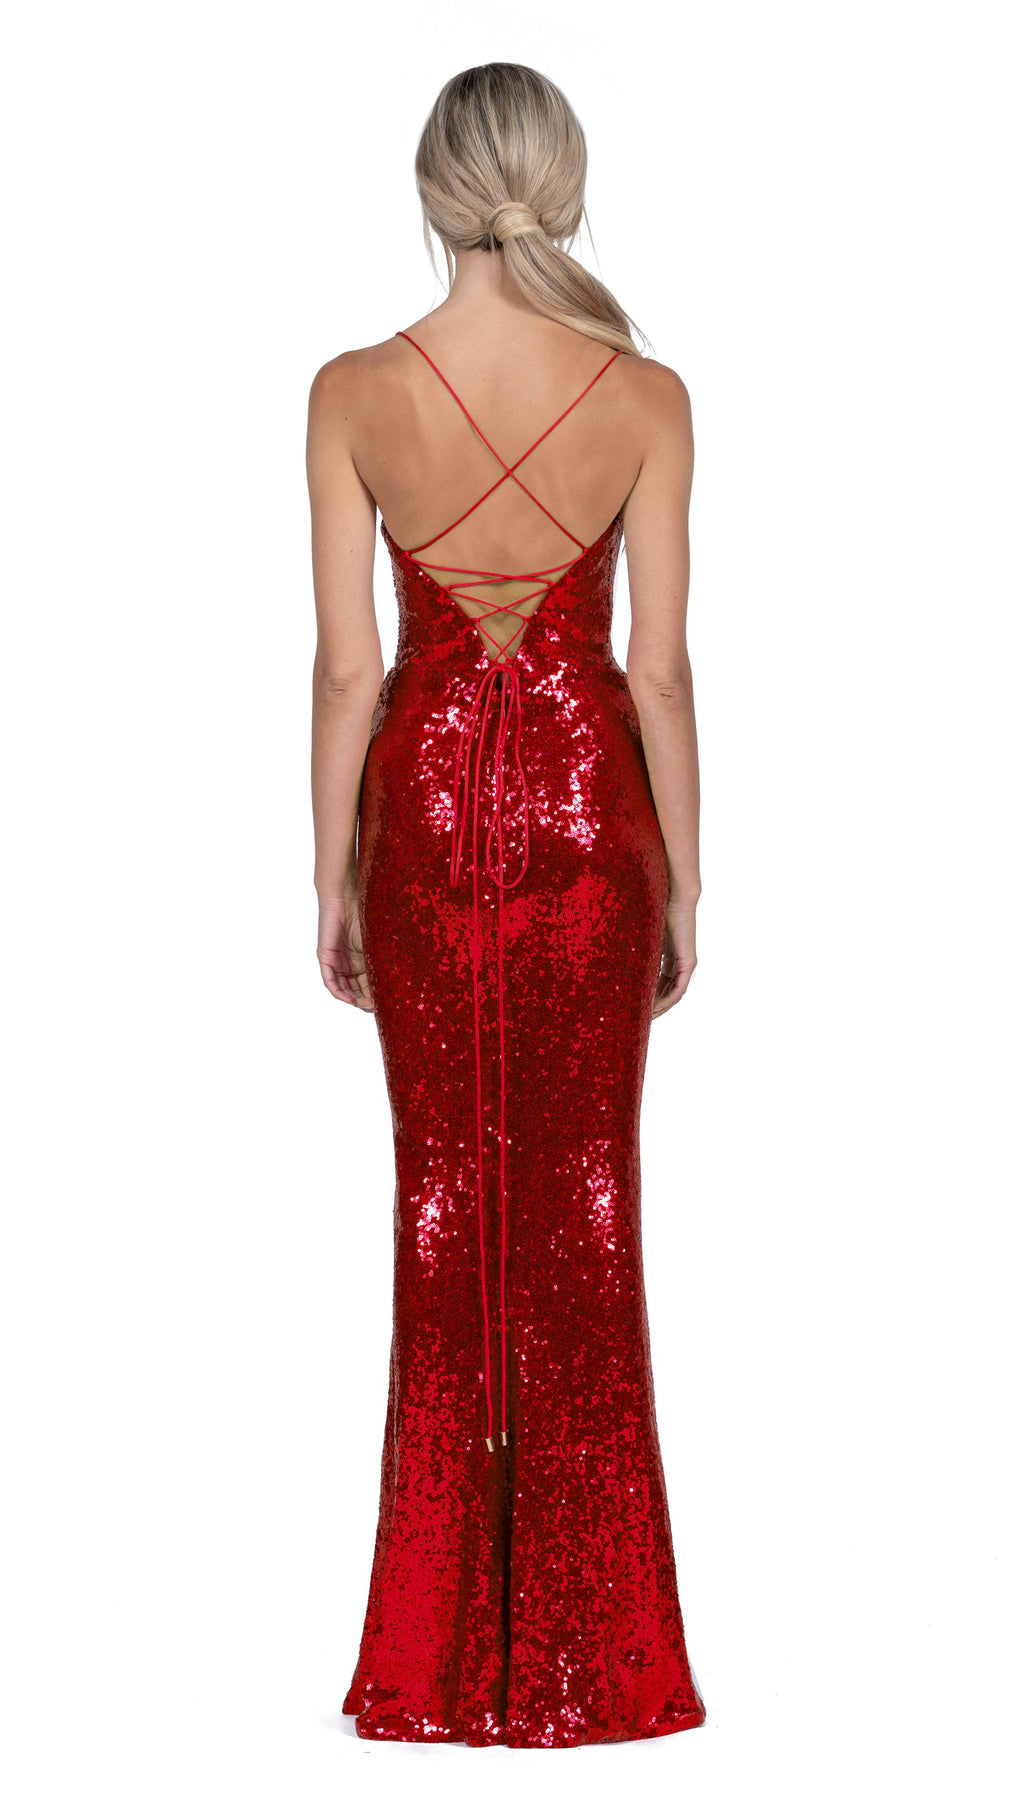 Stephanie Cowl Draped Sequin Gown in Cherry Red BACK